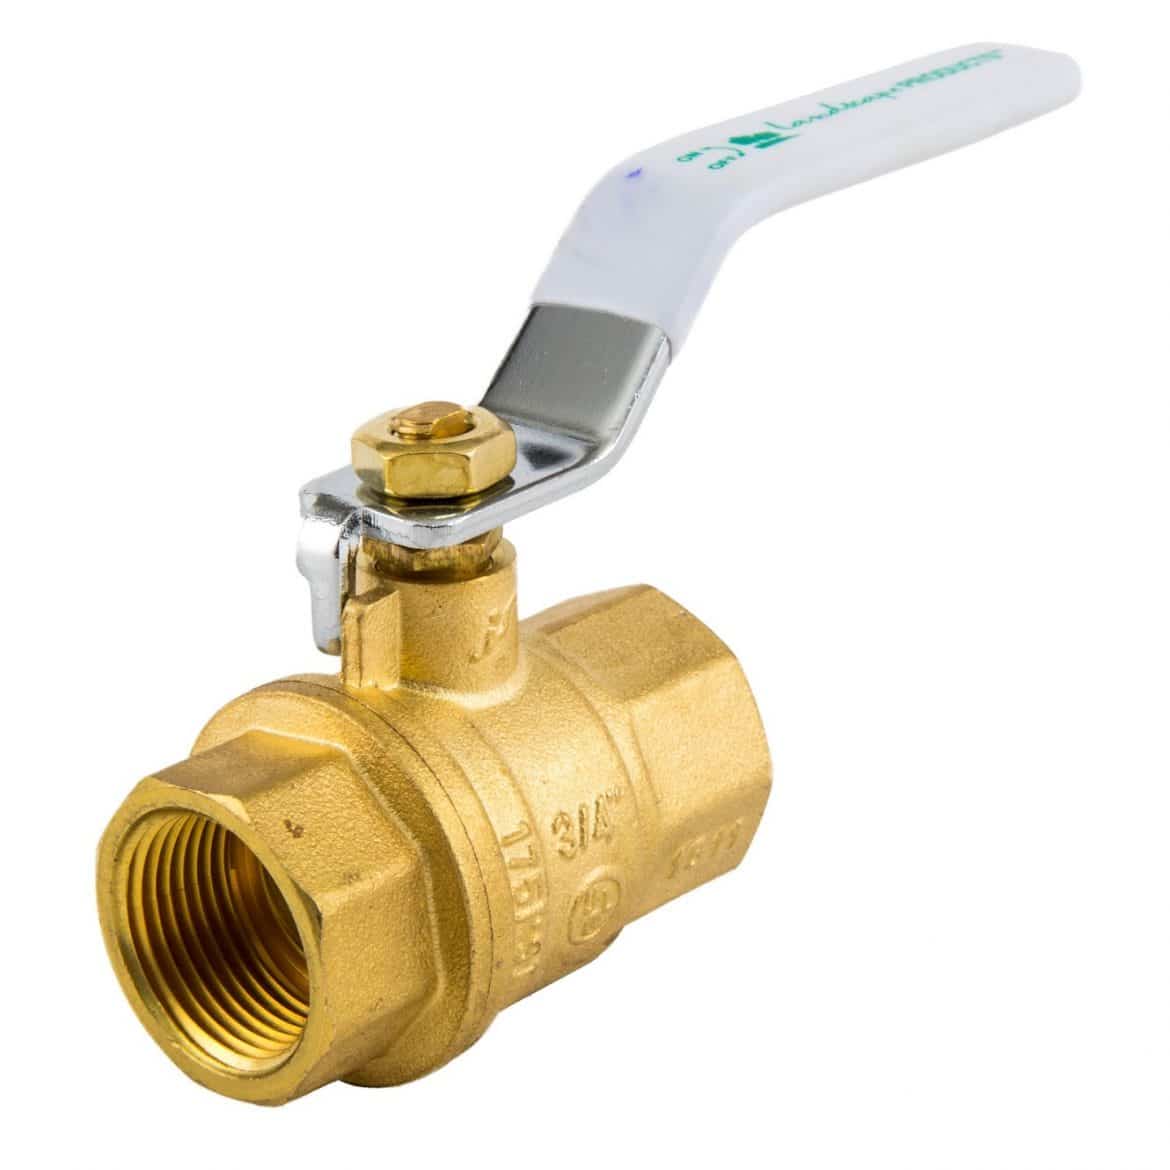 3/4-inch Full Port Brass Ball Valve - Landscape Products Inc.